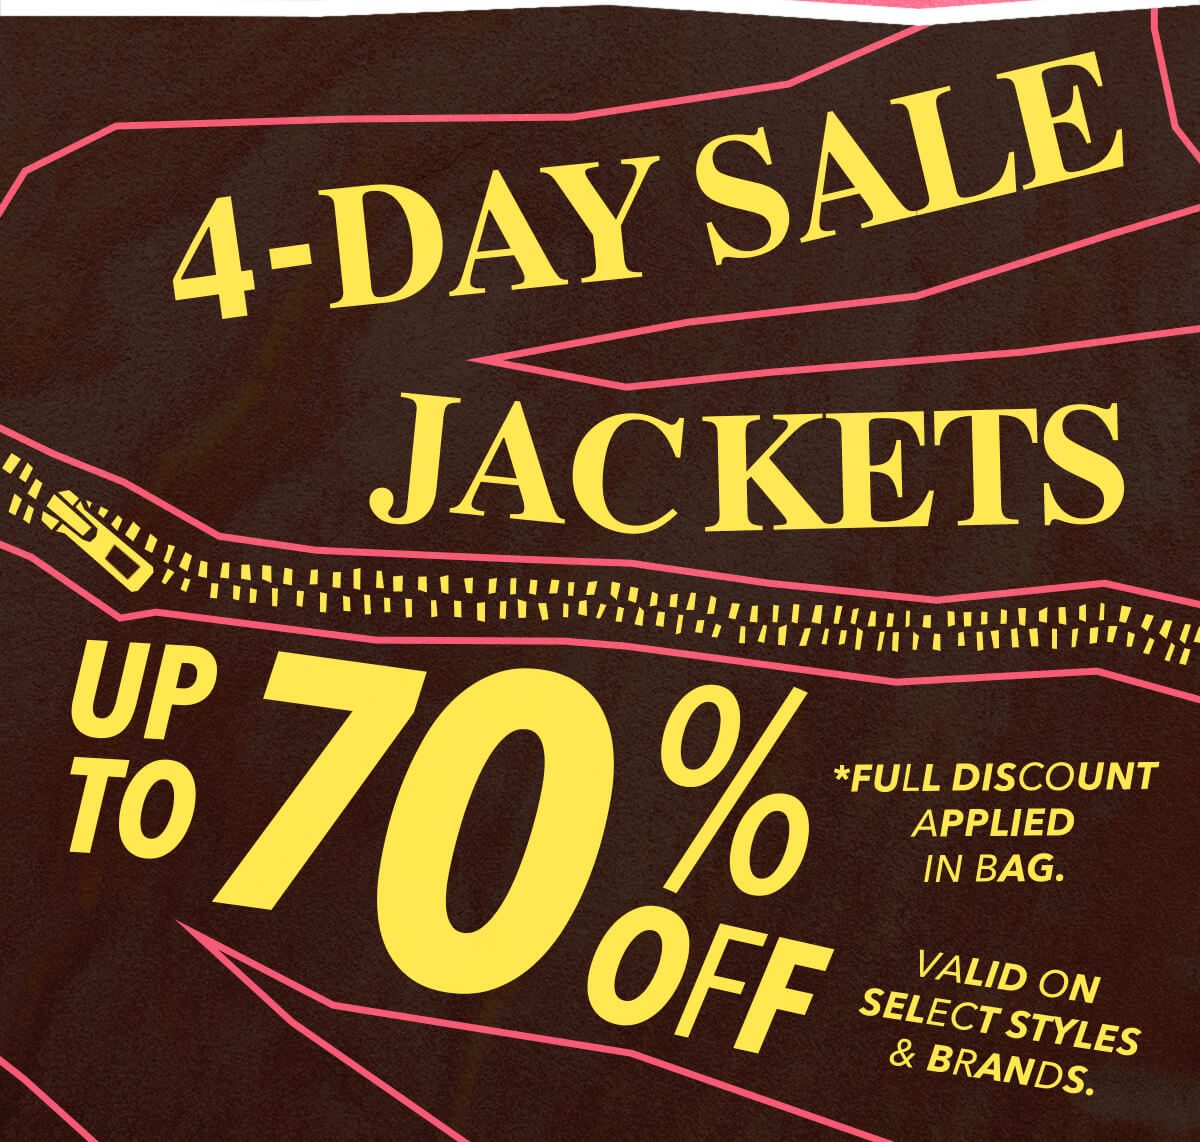 4 DAY SALE - UP TO 70% OFF JACKETS - HUGE SAVINGS ON HUNDREDS OF ITEMS